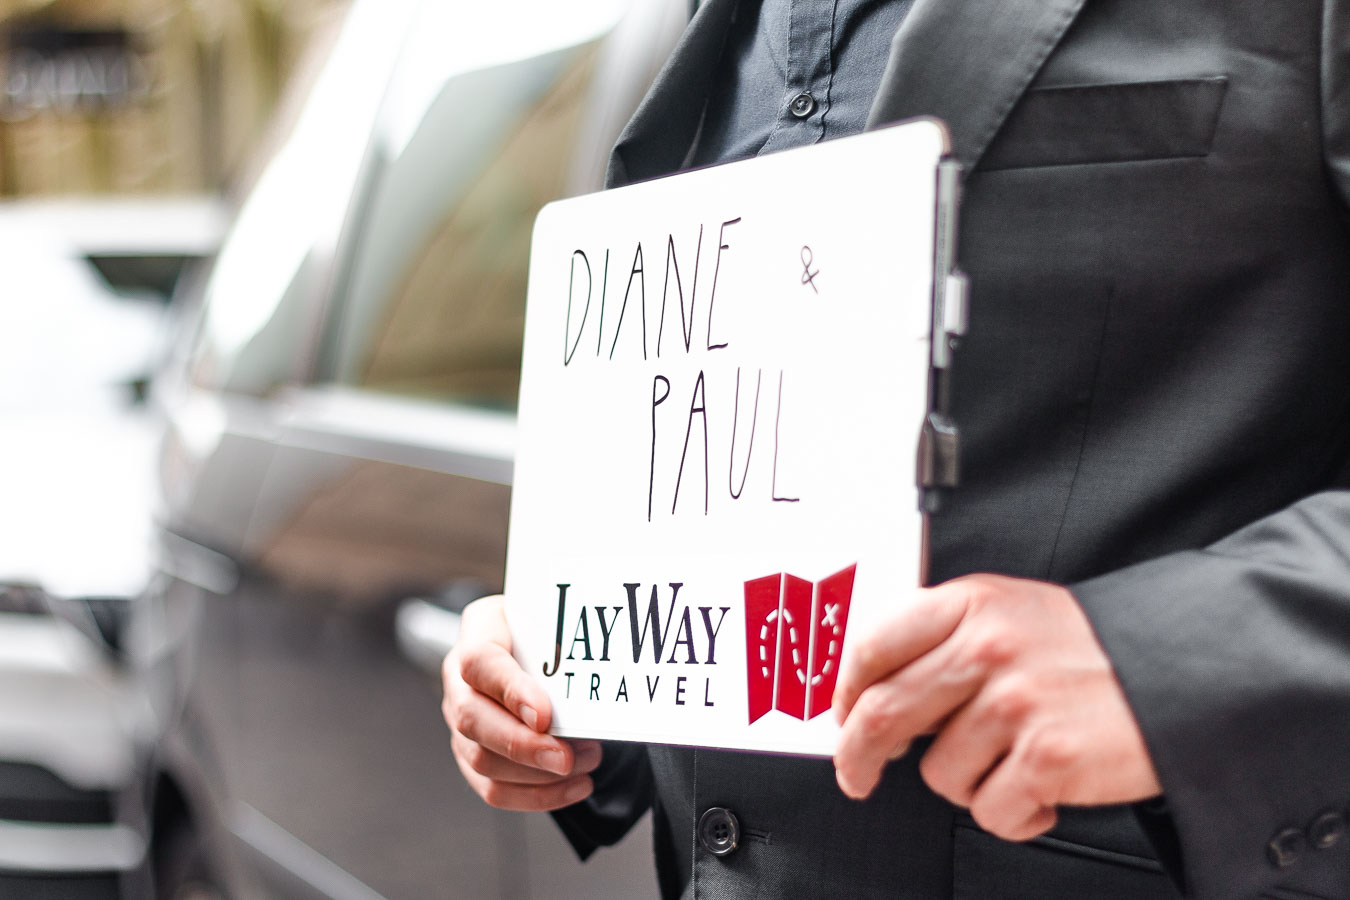 This is a close-up of a man holding a JayWay Travel sign with the names Diane & Paul written on it. 